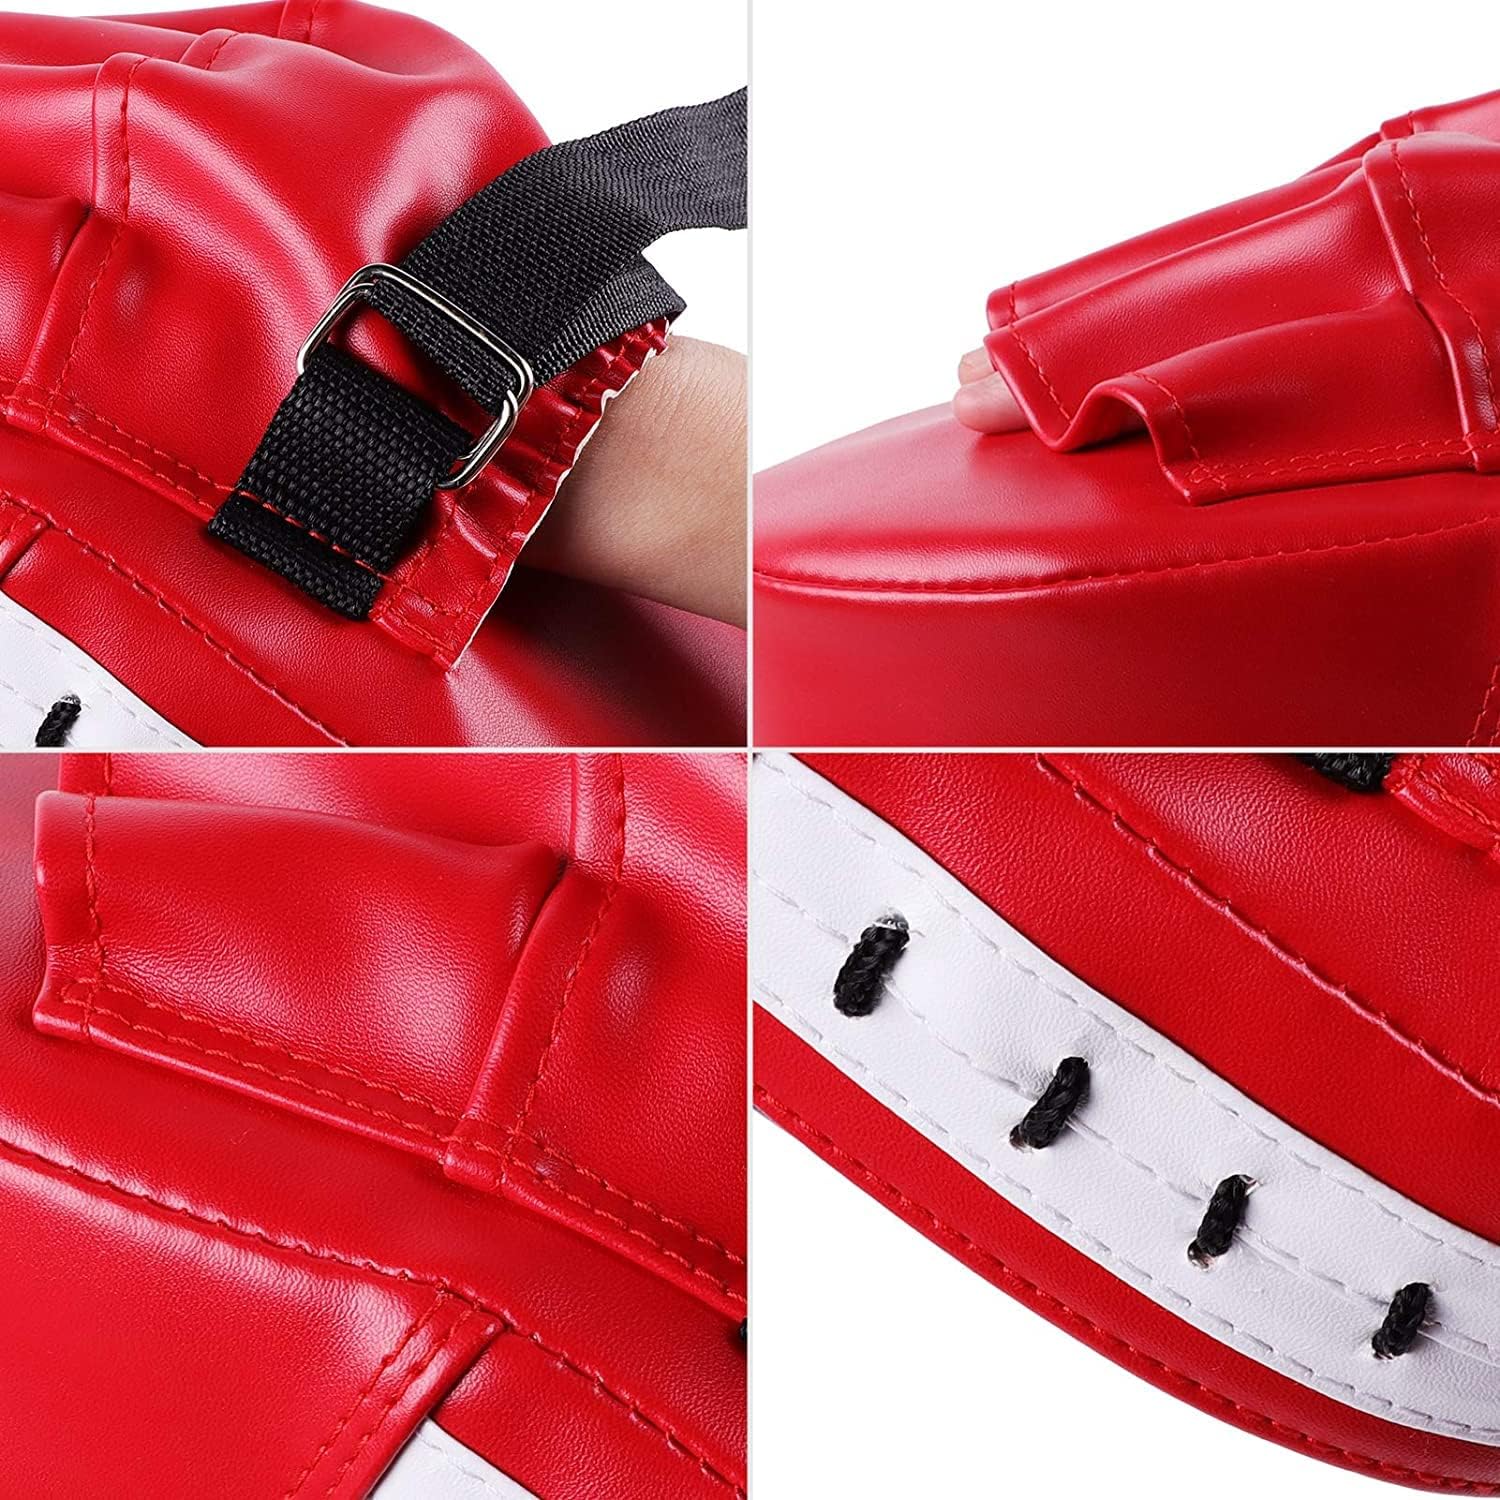 1Pcs Boxer Target Punching Mitts Kickboxing Muay Boxing Mitts Training Focus Punch Mitts Bags Hand Target Pads for Kids, Men & Women (Red and Black)